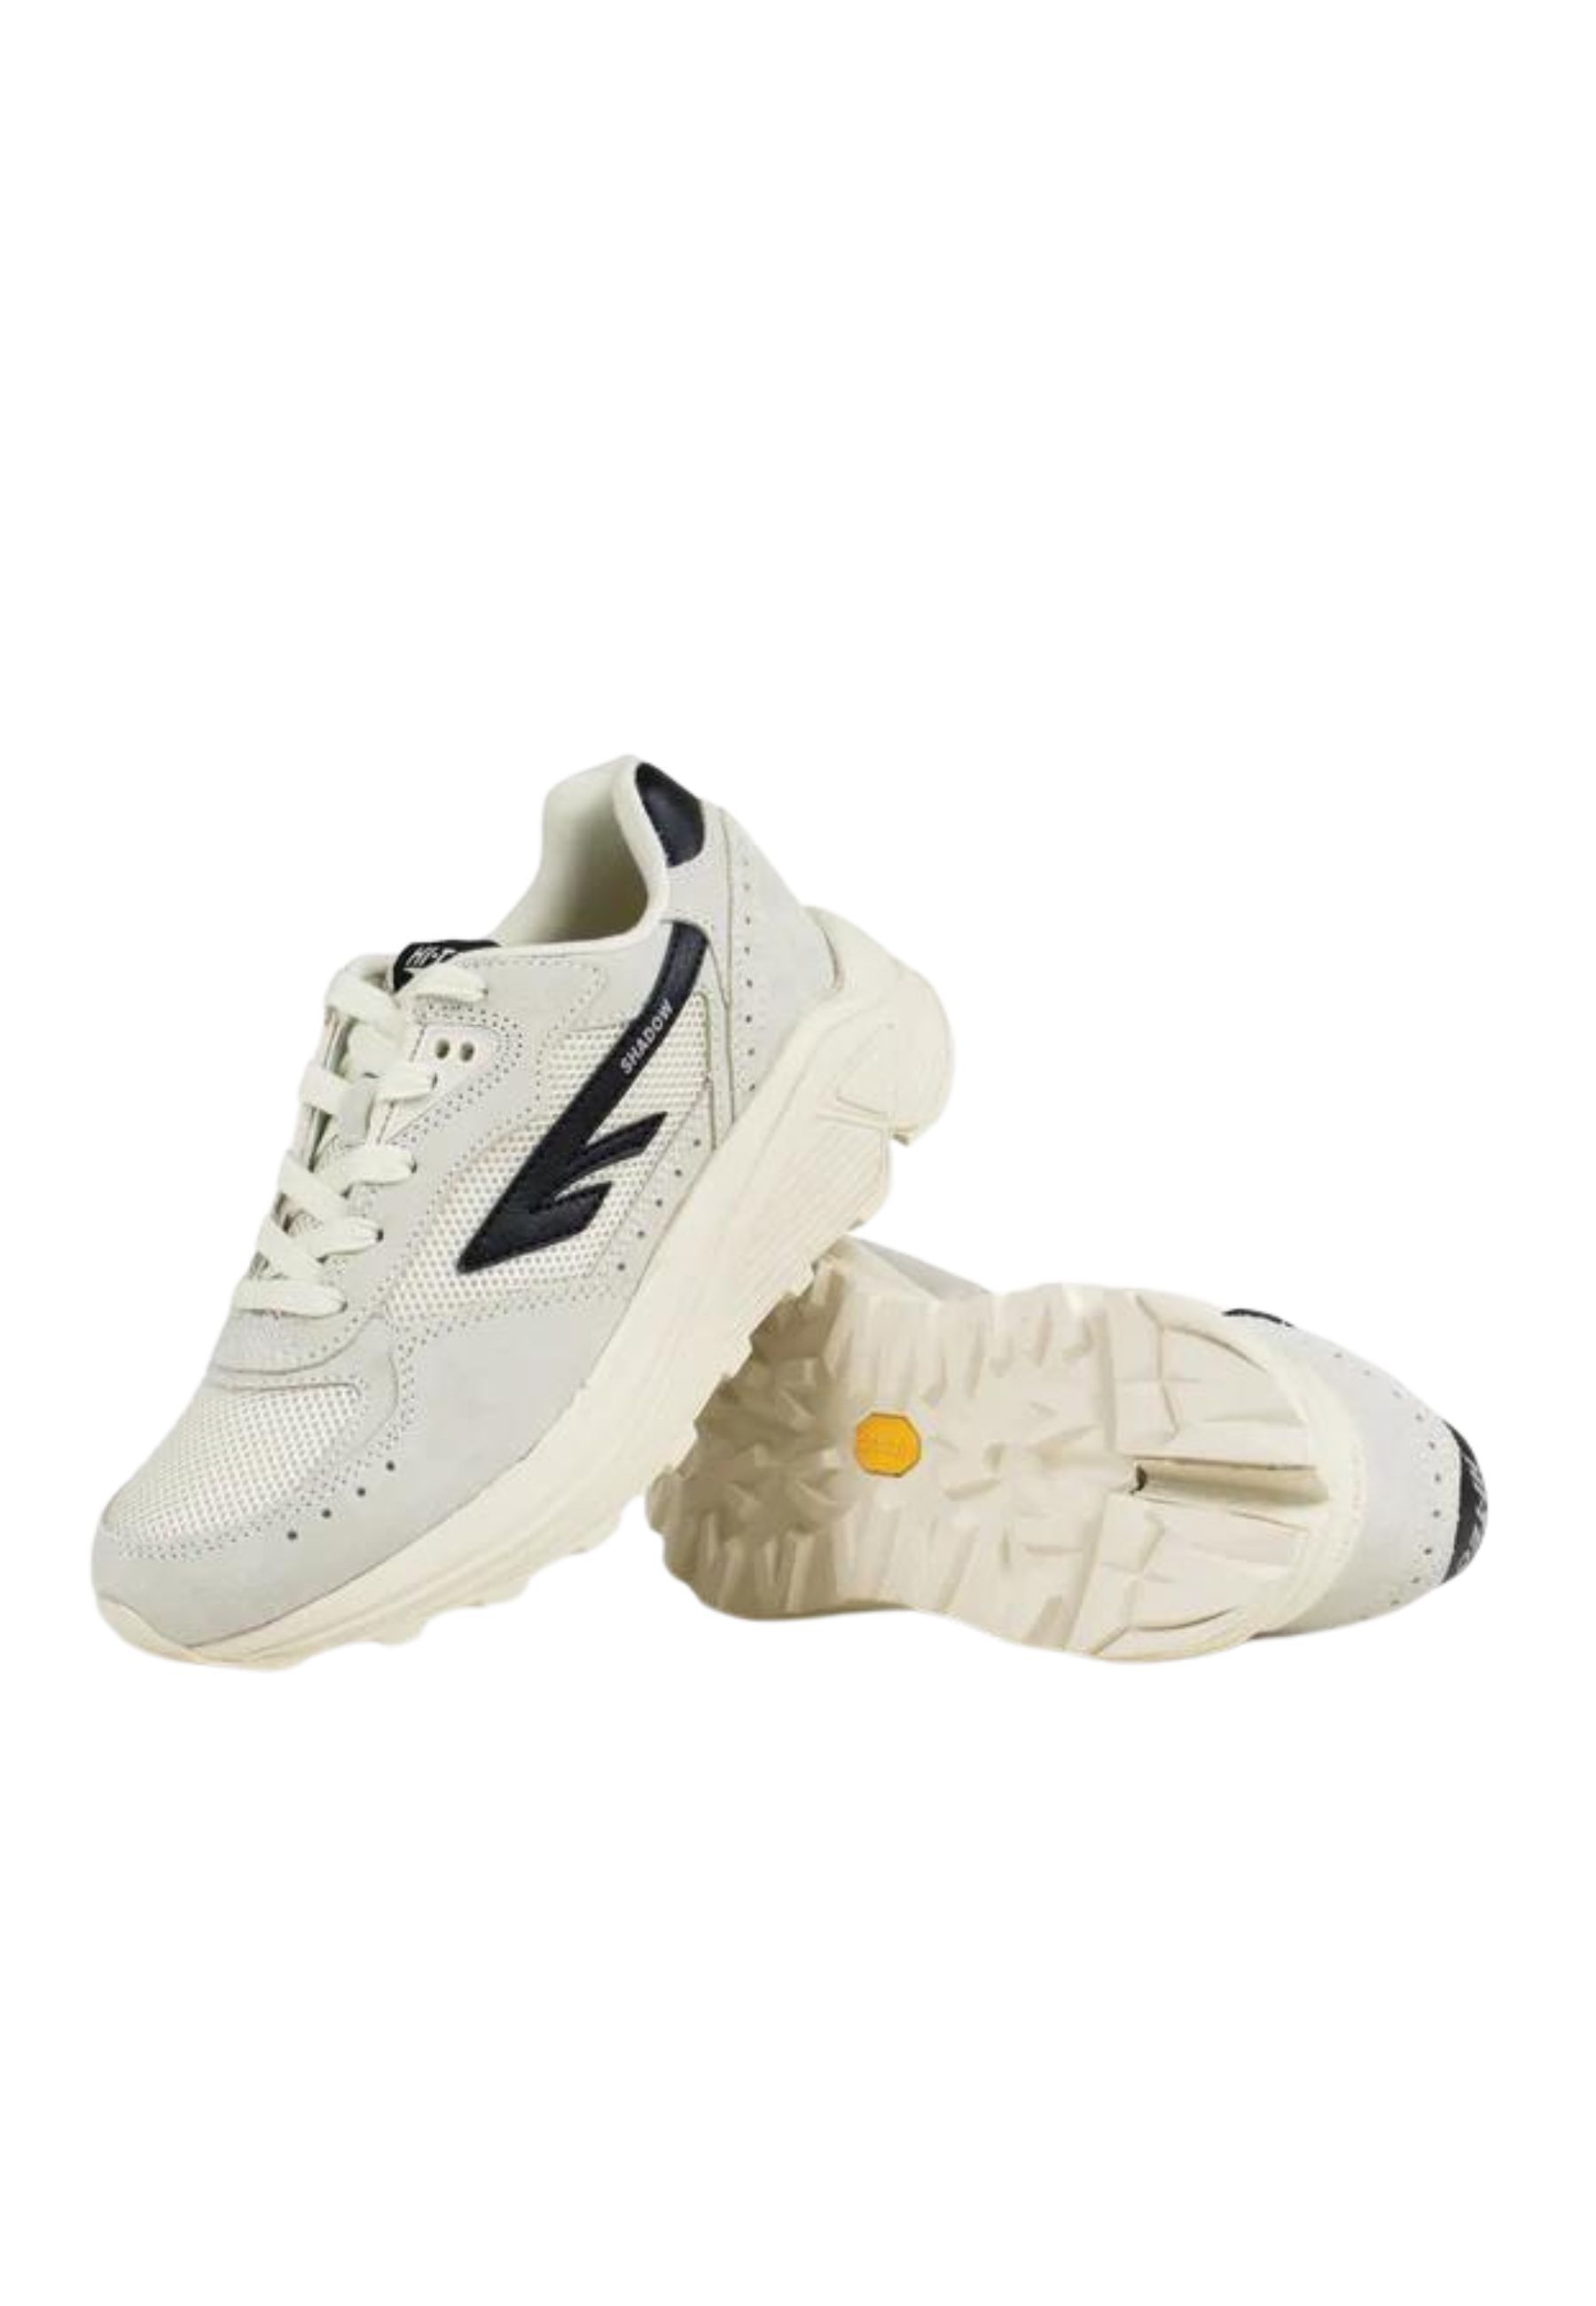 Hts shadow rgs sneakers off white